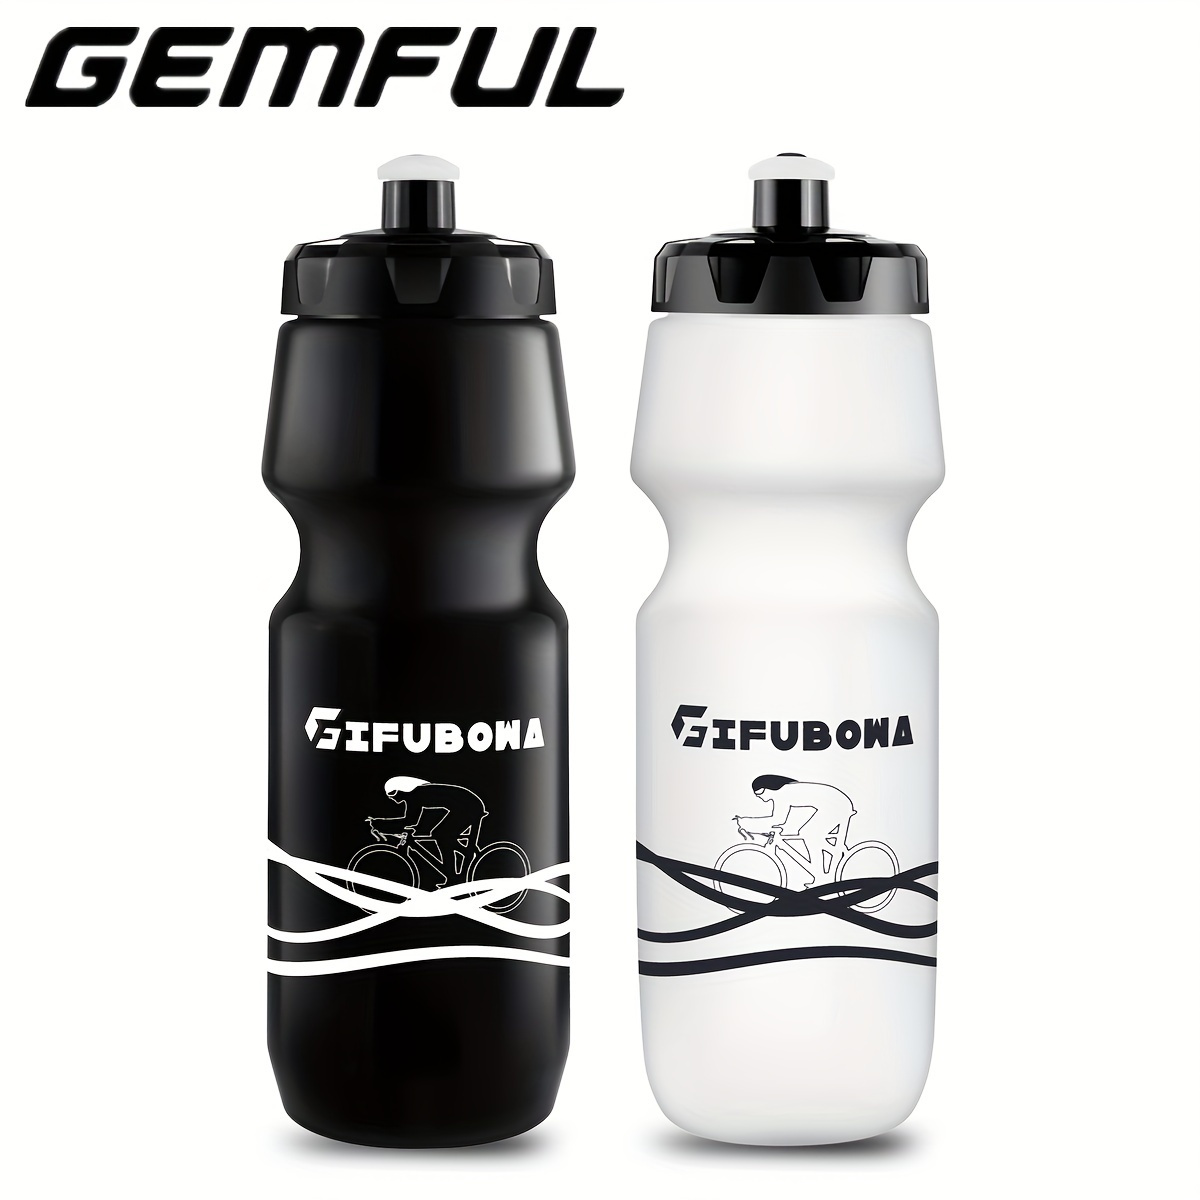 

750ml 24oz Bpa-free Bike Water Bottle For Cycling - Squeeze Sports Drink Bottle For Outdoor Activities